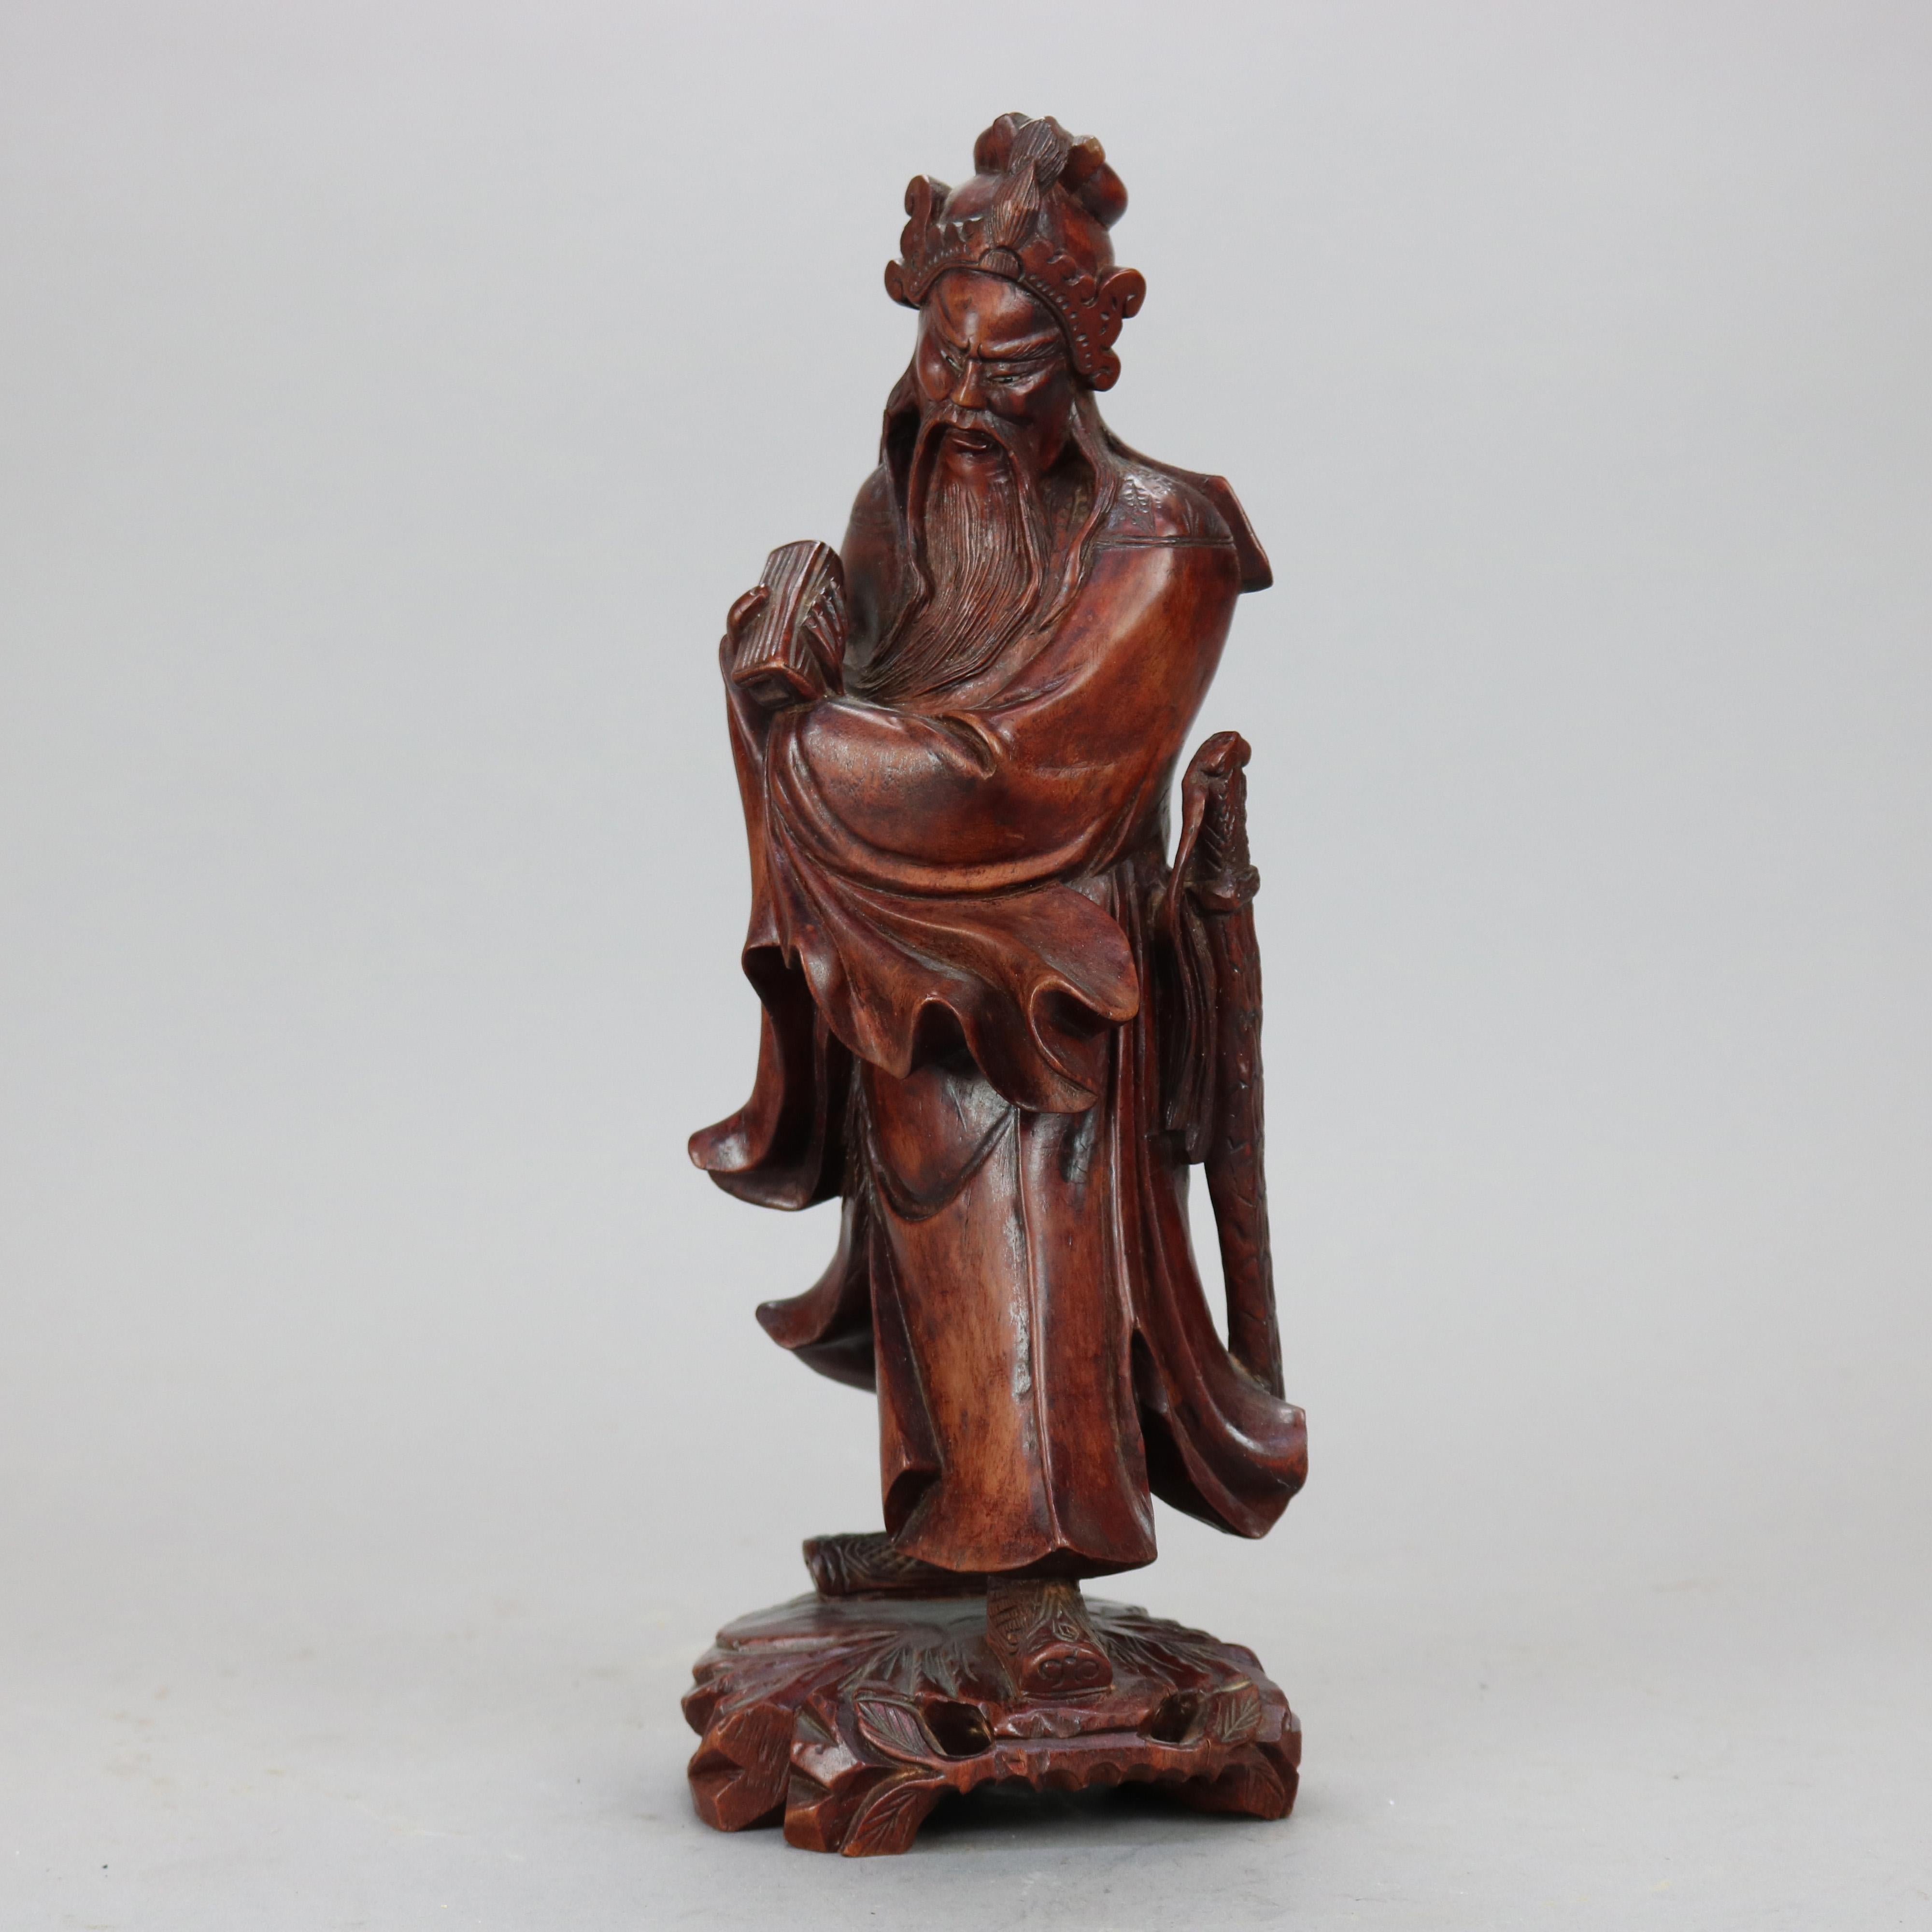 A Chinese hand carved carved hardwood figure depicts a wise man in countryside setting, 20th century

Measures - 12'' H x 4.75'' W x 4'' D.